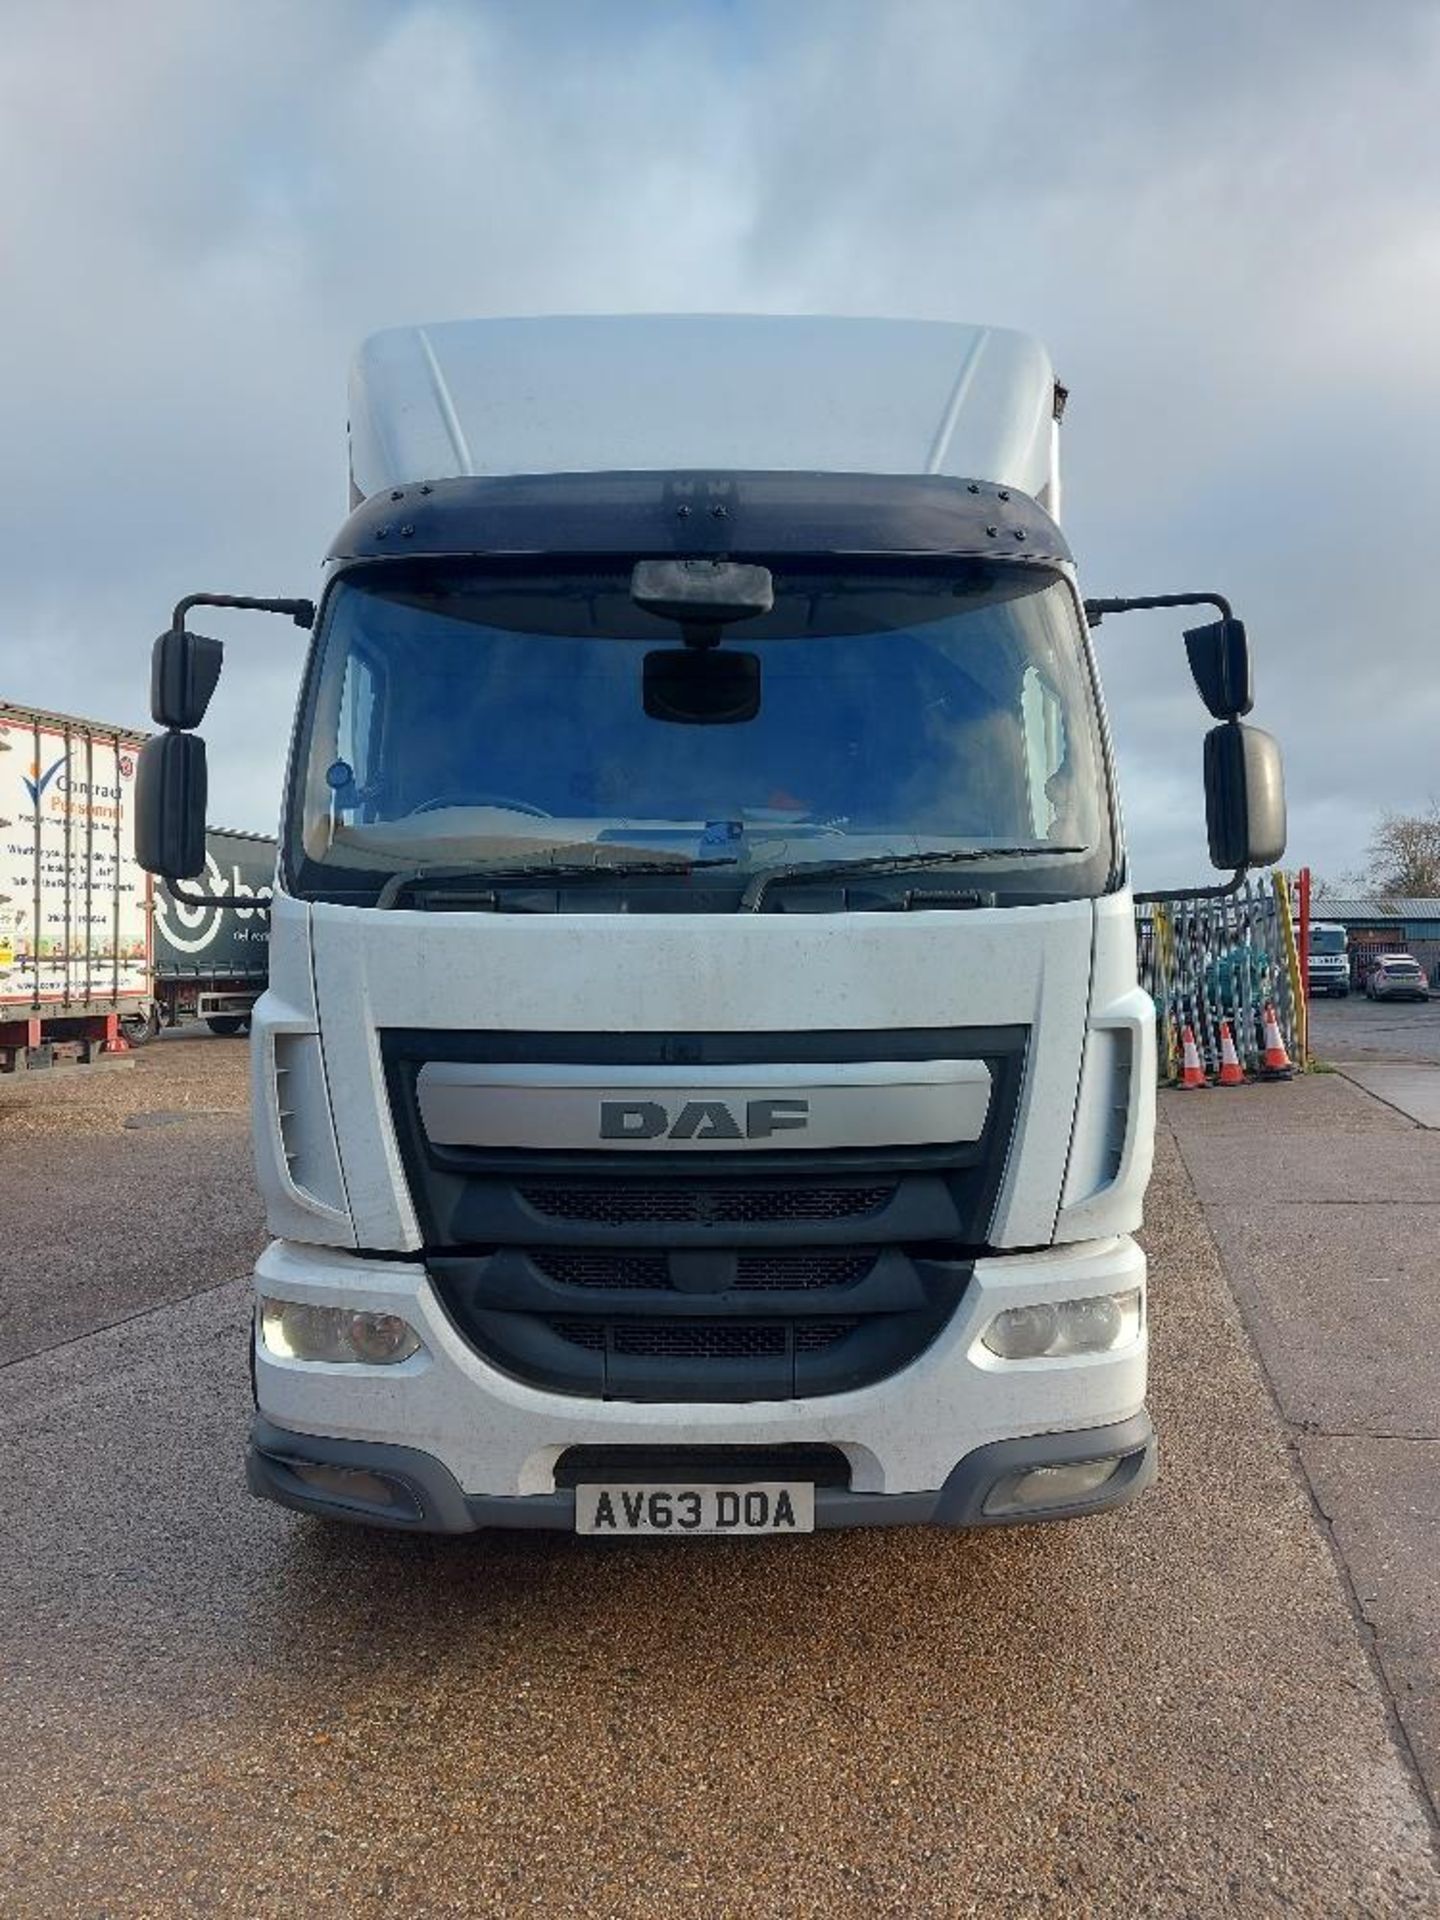 DAF L55.250 4x2 Rigid 18T Curtain Side Lorry with Tail Lift - Image 3 of 11